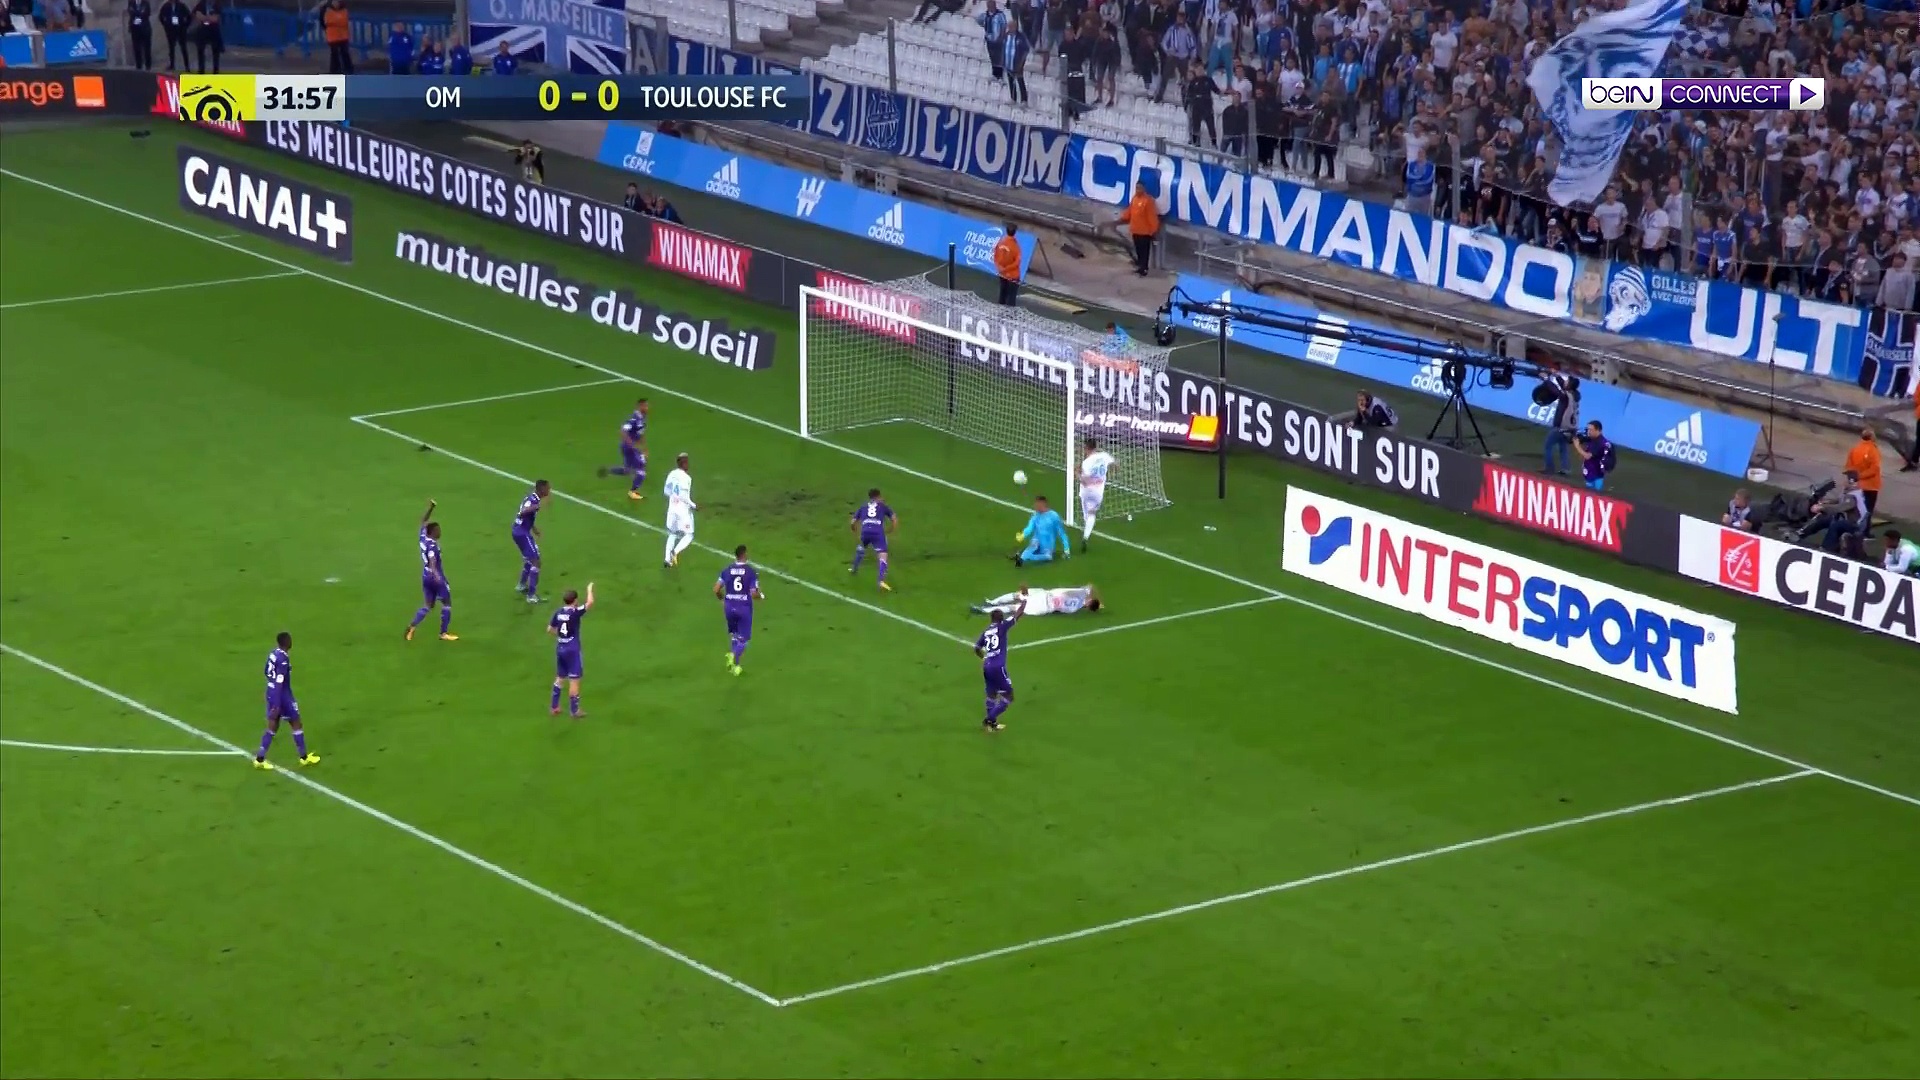 Match Highlights: Marseille 2 - 0 Toulouse